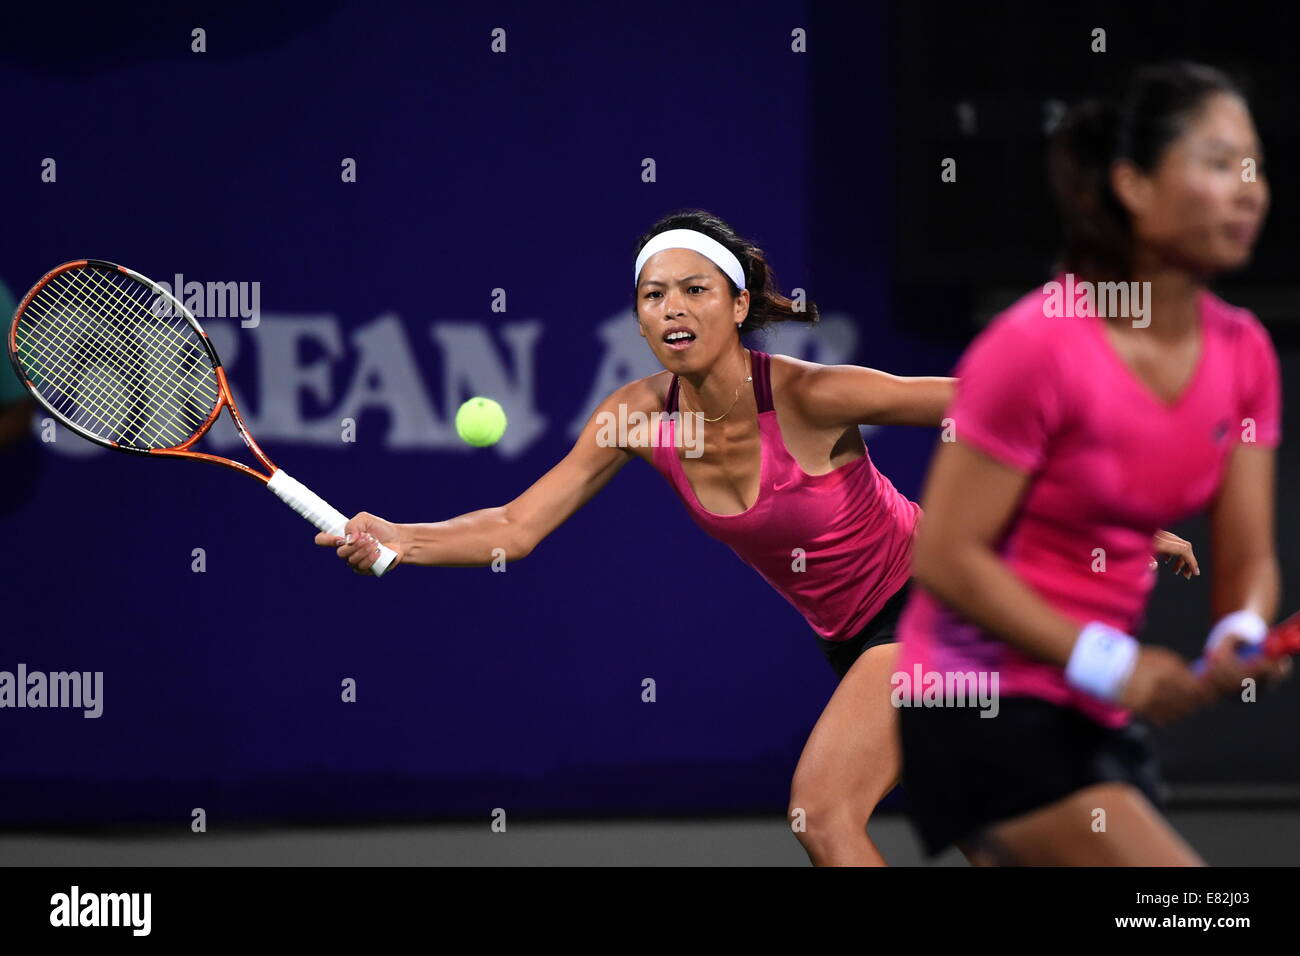 Incheon, South Korea. 29th Sep, 2014. Hsieh Su Wei (L) of Chinese Taipei returns the ball during the women's doubles gold medal match of tennis against Kumkhum Luksika and Tanasugarn Tamarine of Tailand at the 17th Asian Games in Incheon, South Korea, Sept. 29, 2014. Thailand defeated Chinese Taipei 2-1 and claimed the title. © Gao Jianjun/Xinhua/Alamy Live News Stock Photo